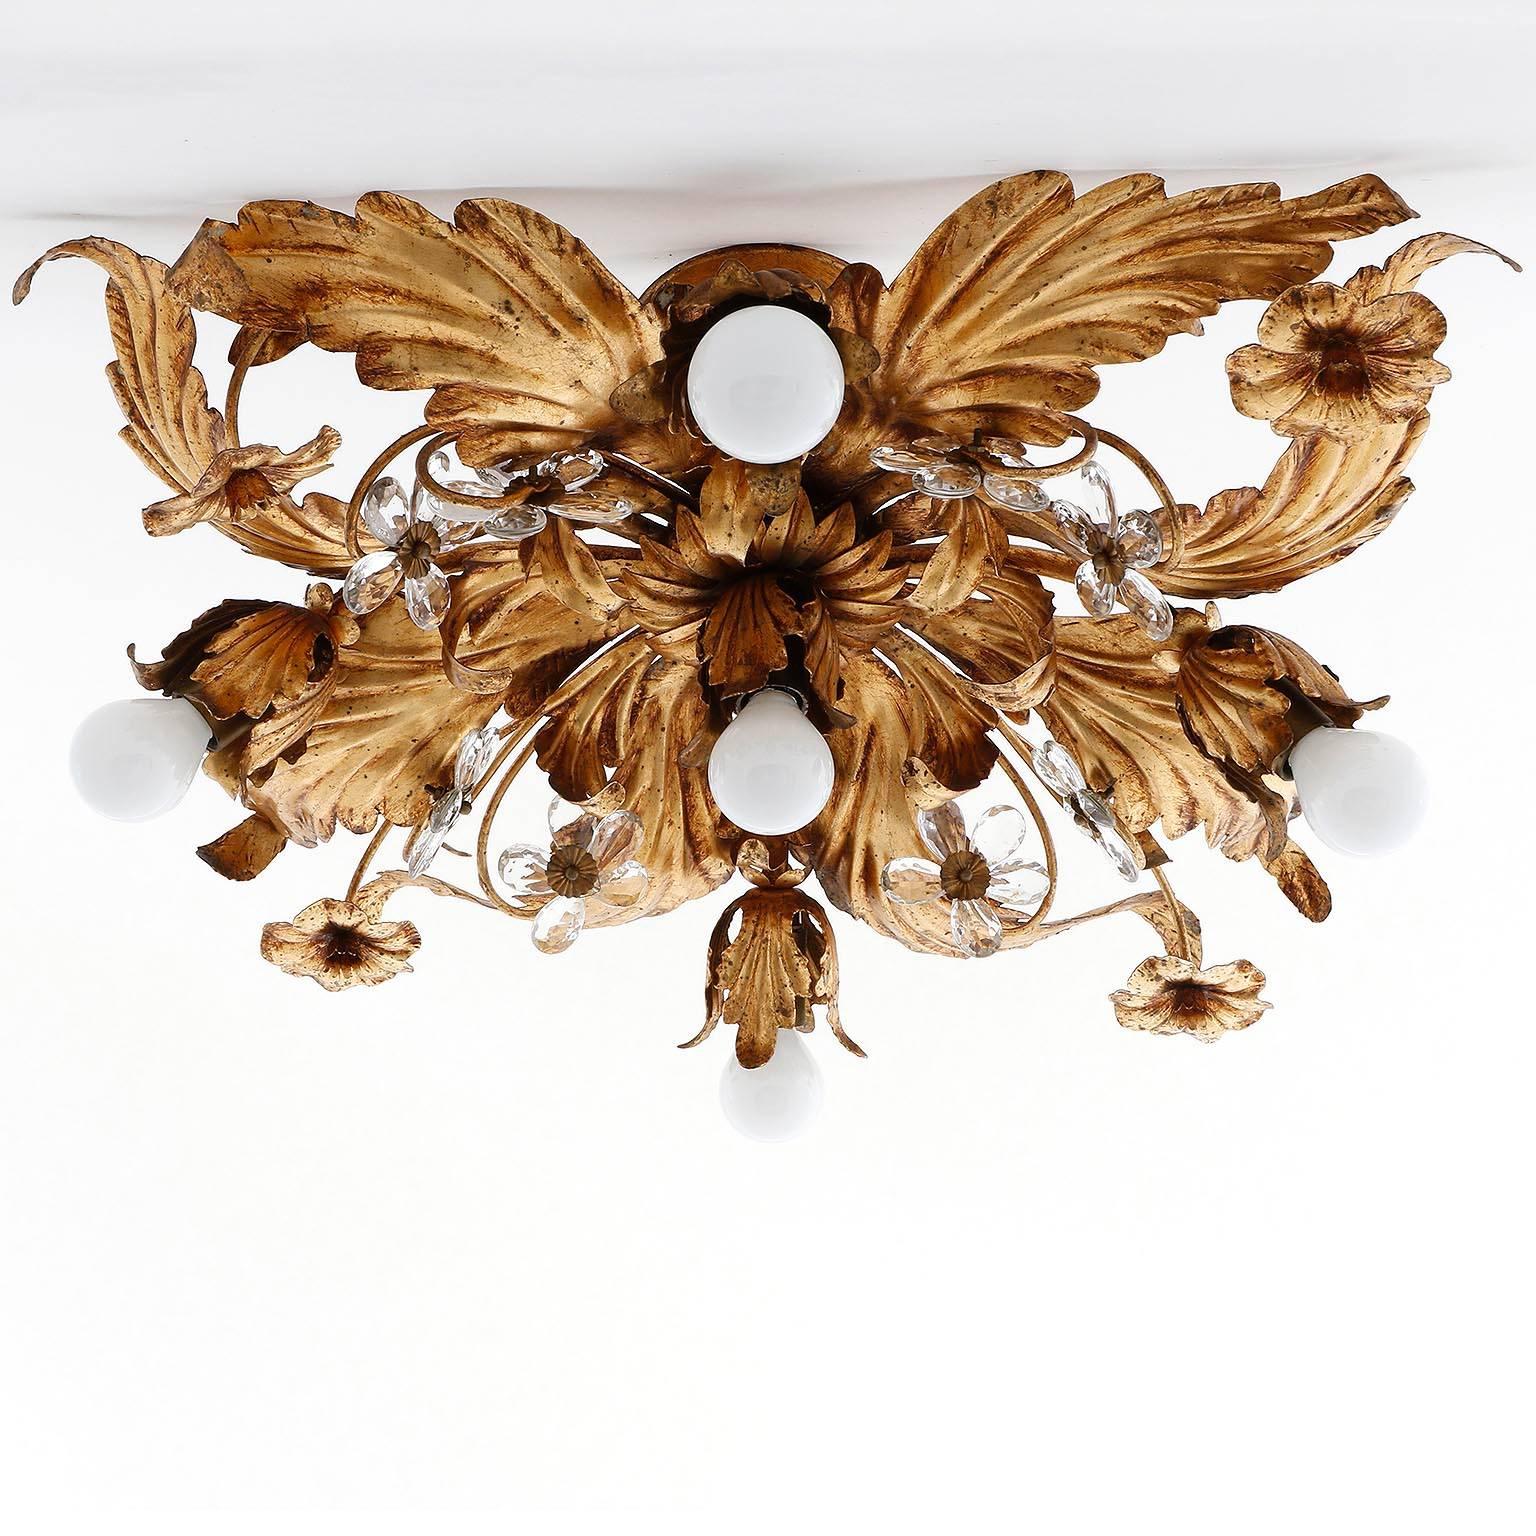 A floral flush mount light from Italy, manufactured in Mid-Century between 1960 and 1970.
It is made of antique gilt or bronzed metal and cut crystal glass. The lamp has five sockets for LEDs or small Edison base bulbs (5 x max. 40 W).

There are